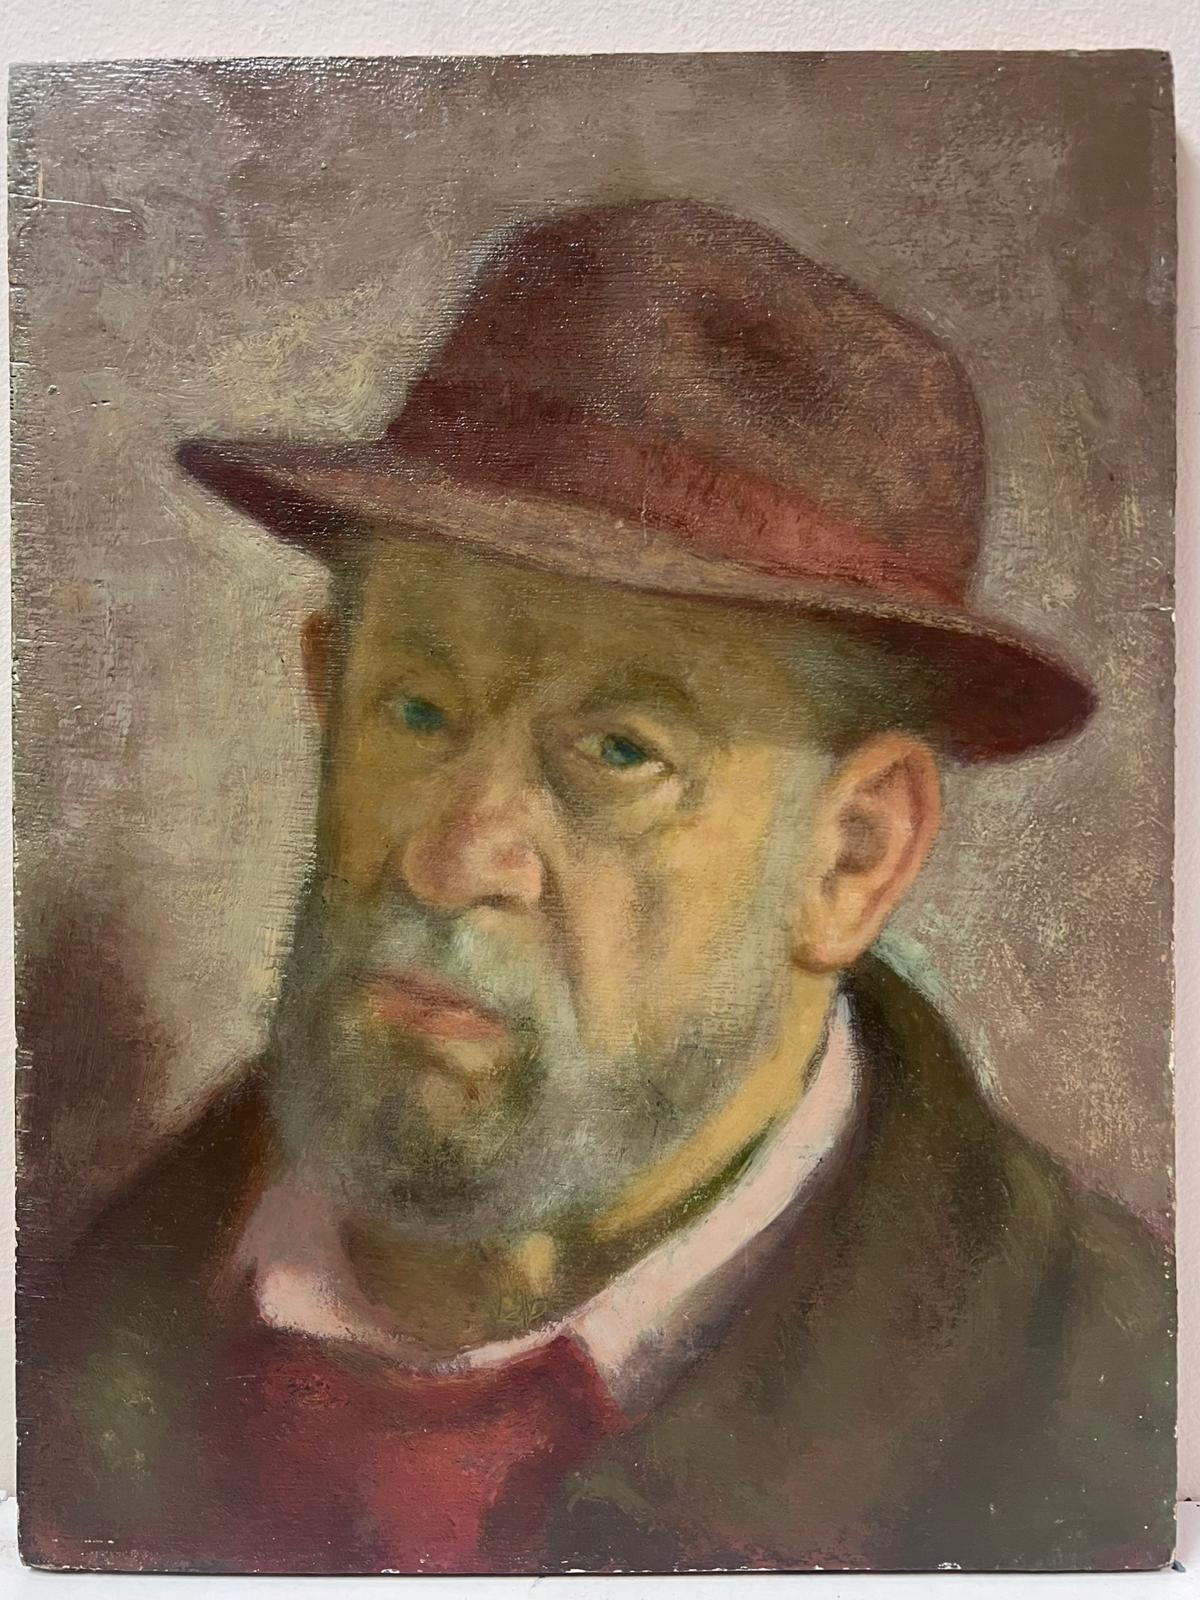 Mid 20th Century Portrait of Elderly Man with Beard Wearing Old Hat, oil paint - Painting by Jacob Markiel